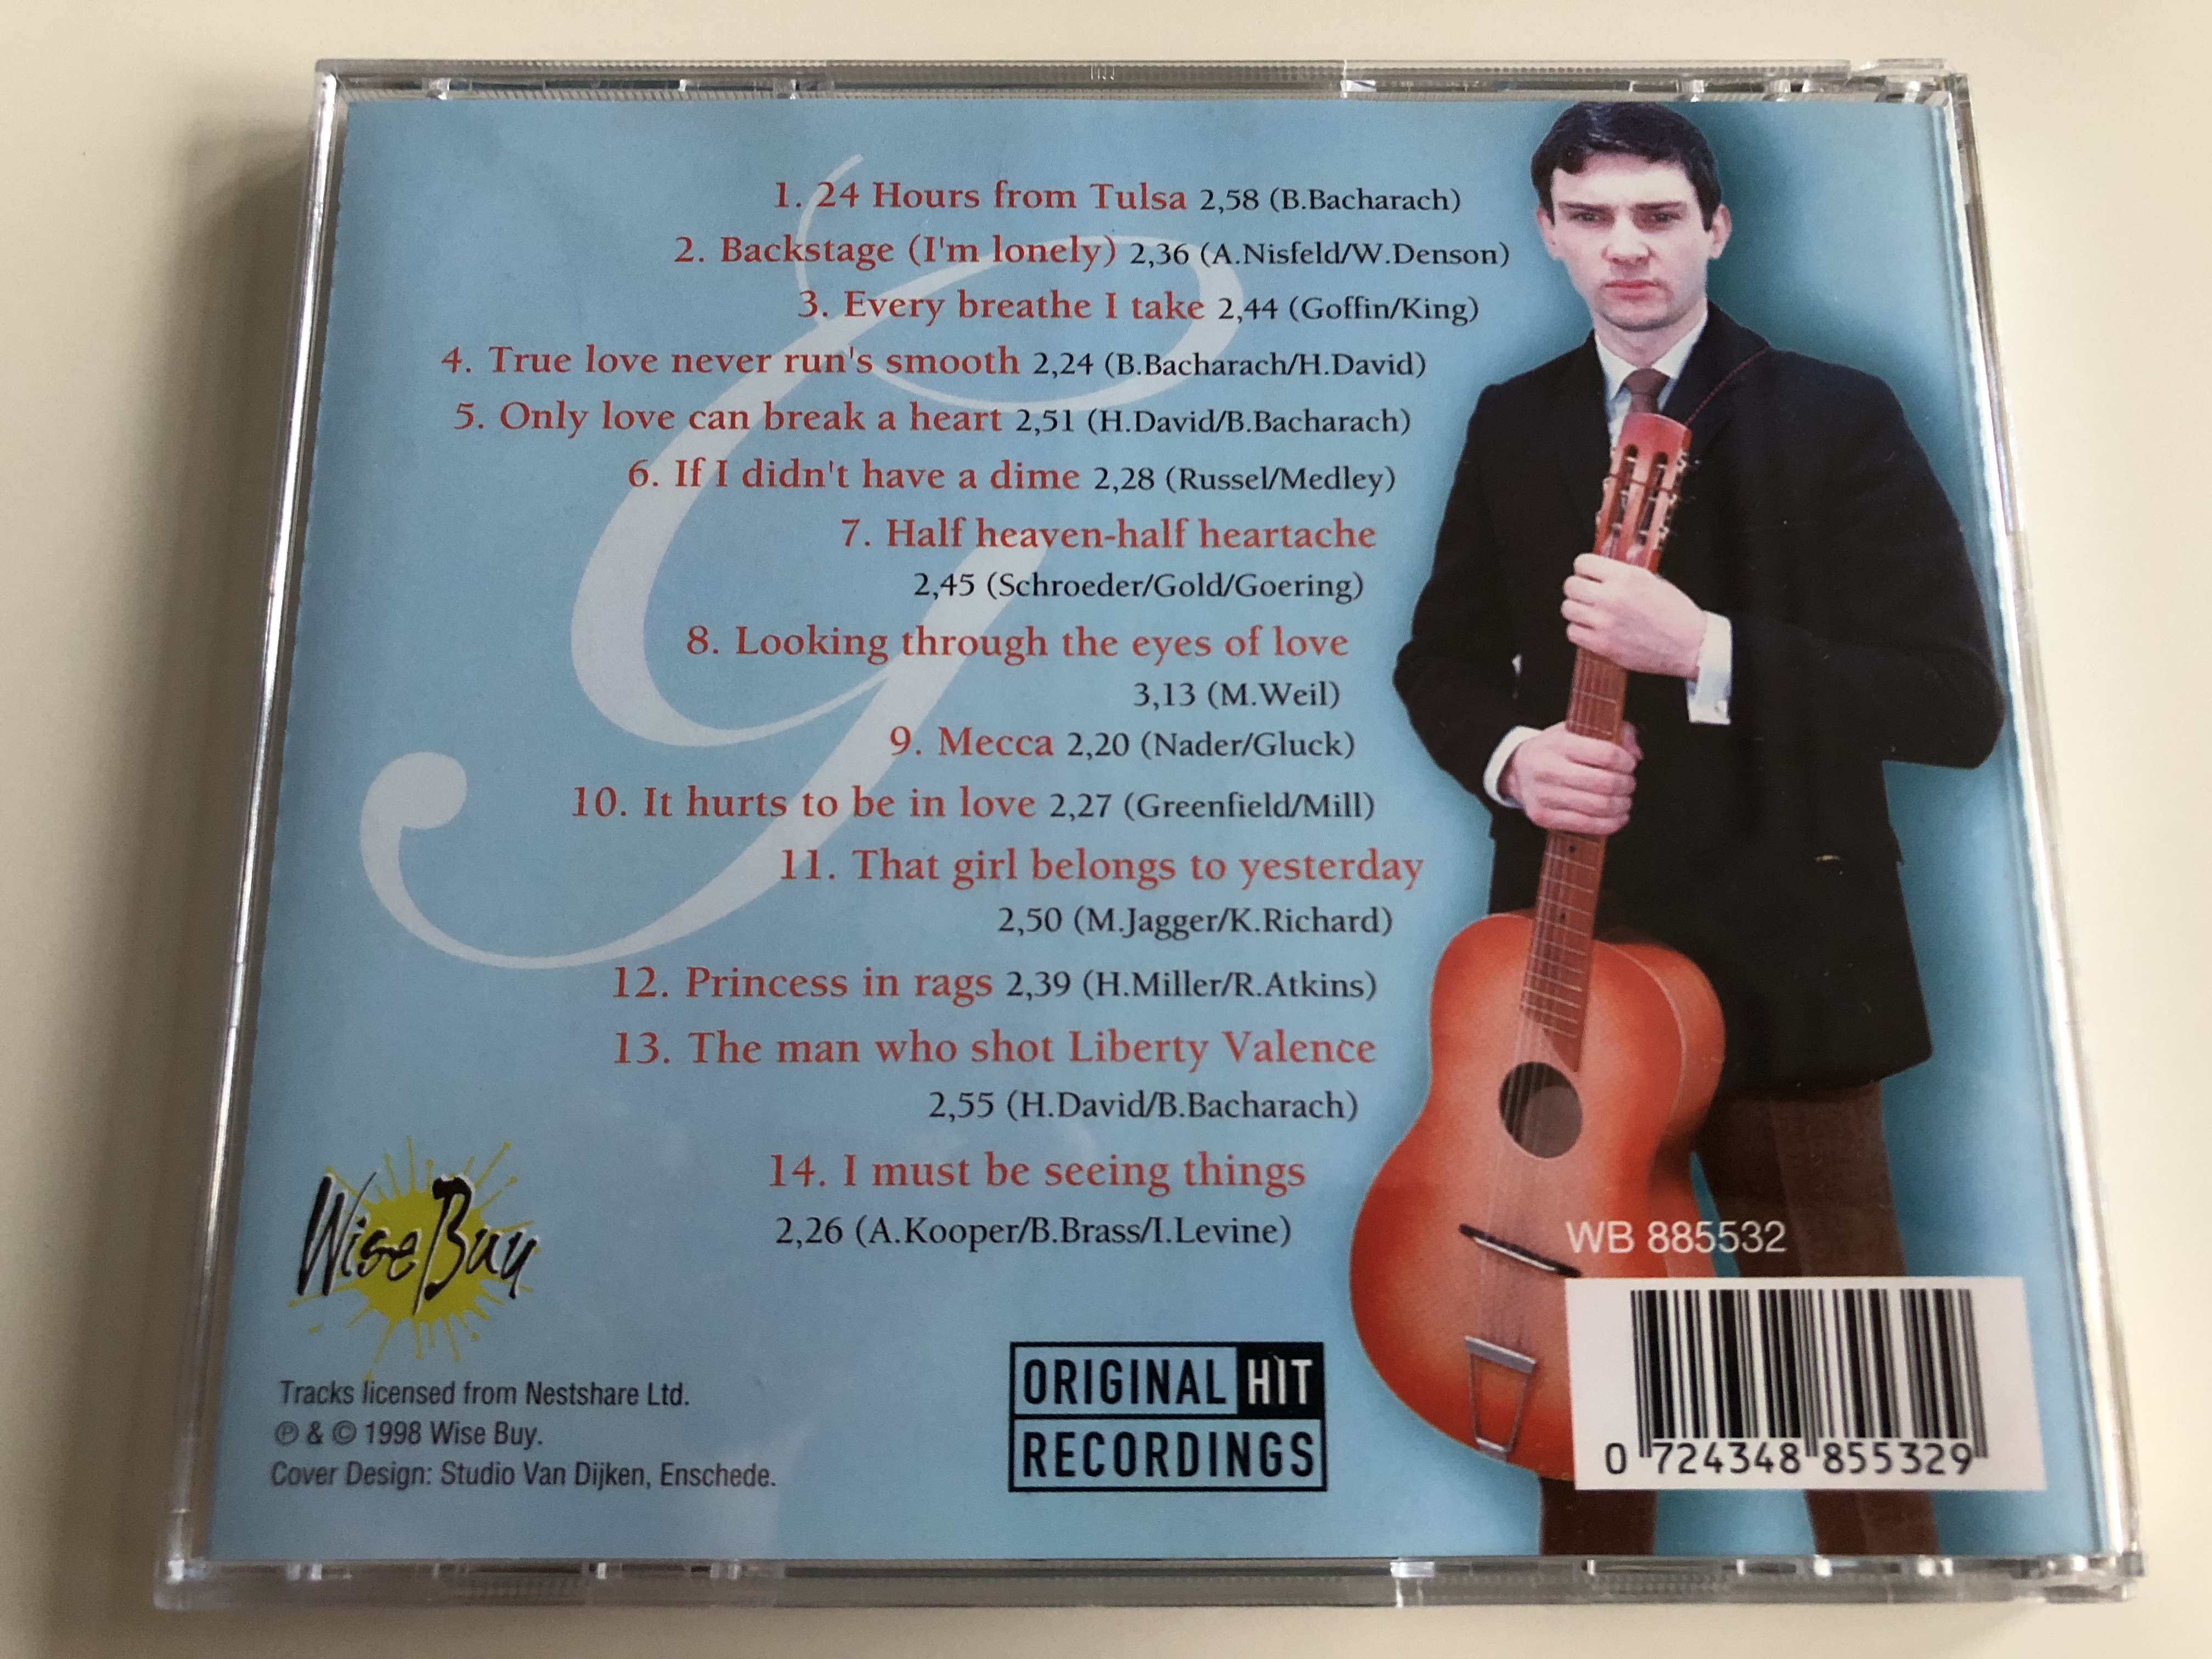 gene-pitney-the-very-best-of-24-hours-from-tulsa-backstage-i-m-lonely-only-love-can-break-a-heart-it-hurts-to-be-in-love-tha-man-who-shot-liberty-valence-wise-buy-audio-cd-1998-wb-8855-4-.jpg